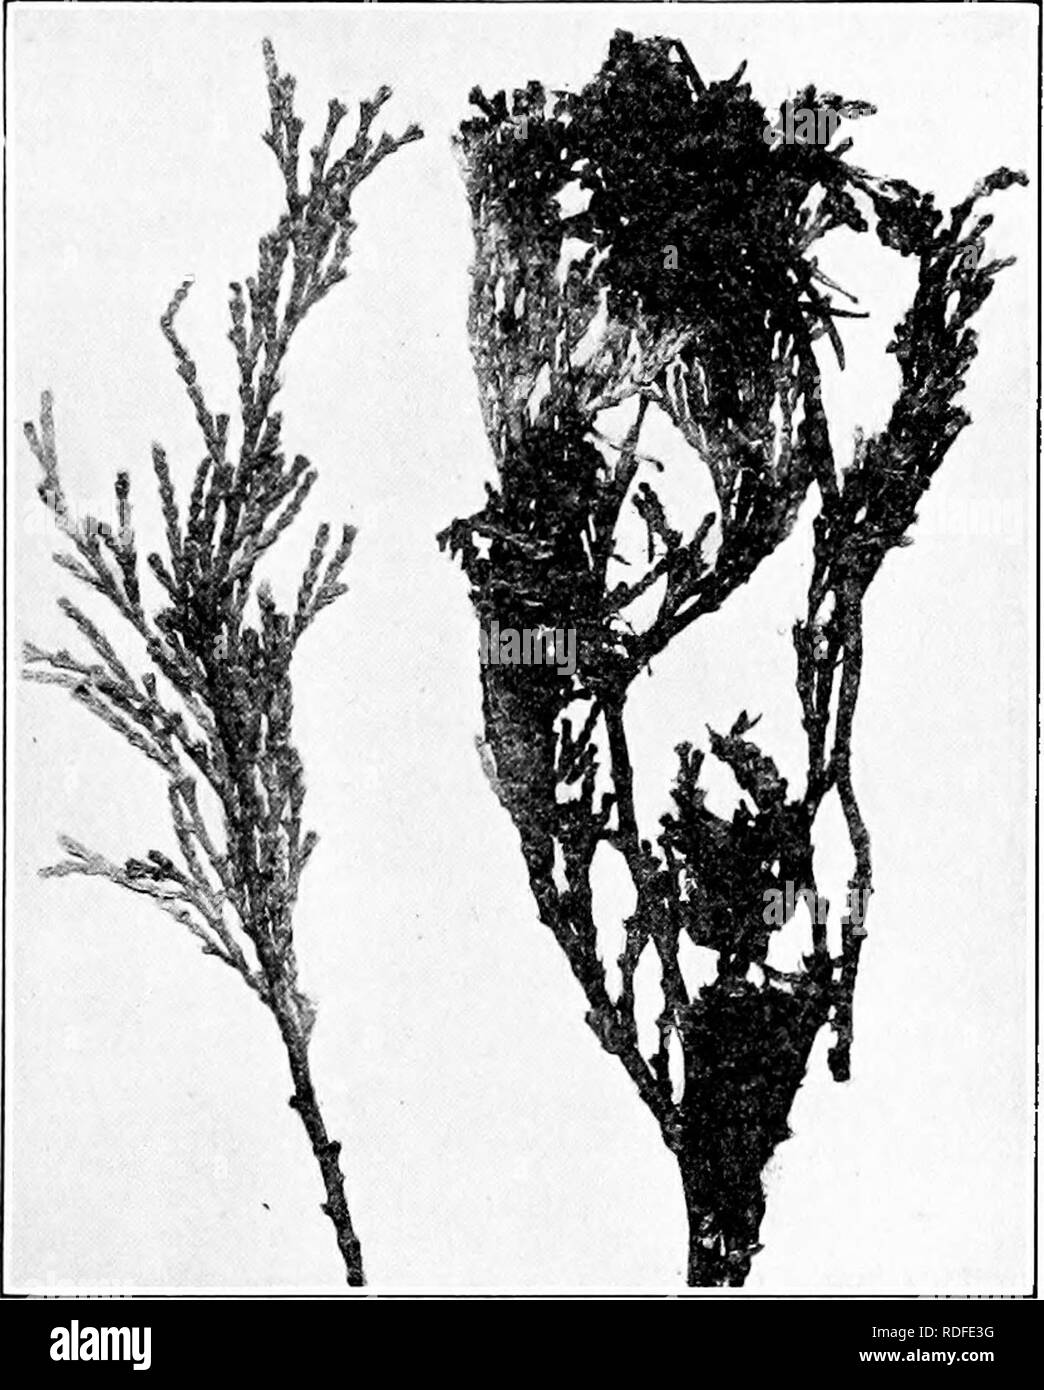 . Manual of tree diseases . Trees. CEDAR DISEASES 131 by a ground fire. The same disease affects similarly spruce, fir, juniper, arbor-vitse and hemlock. It is described under spruce diseases, on page 317.. Fig. 16. — Brown felt-blight on inceusa cedar. Eastern Witches'-Bkoom Caused by Gymnosporangium myricaium (Schw.) Fromme Witches'-brooms are found on white cedar along the At- lantic Coast from Massachusetts to Delaware and in northern Florida and southern Alabama. The witches'-broom and branch-swelling diseases, both caused by similar rust-fungi,. Please note that these images are extracte Stock Photo